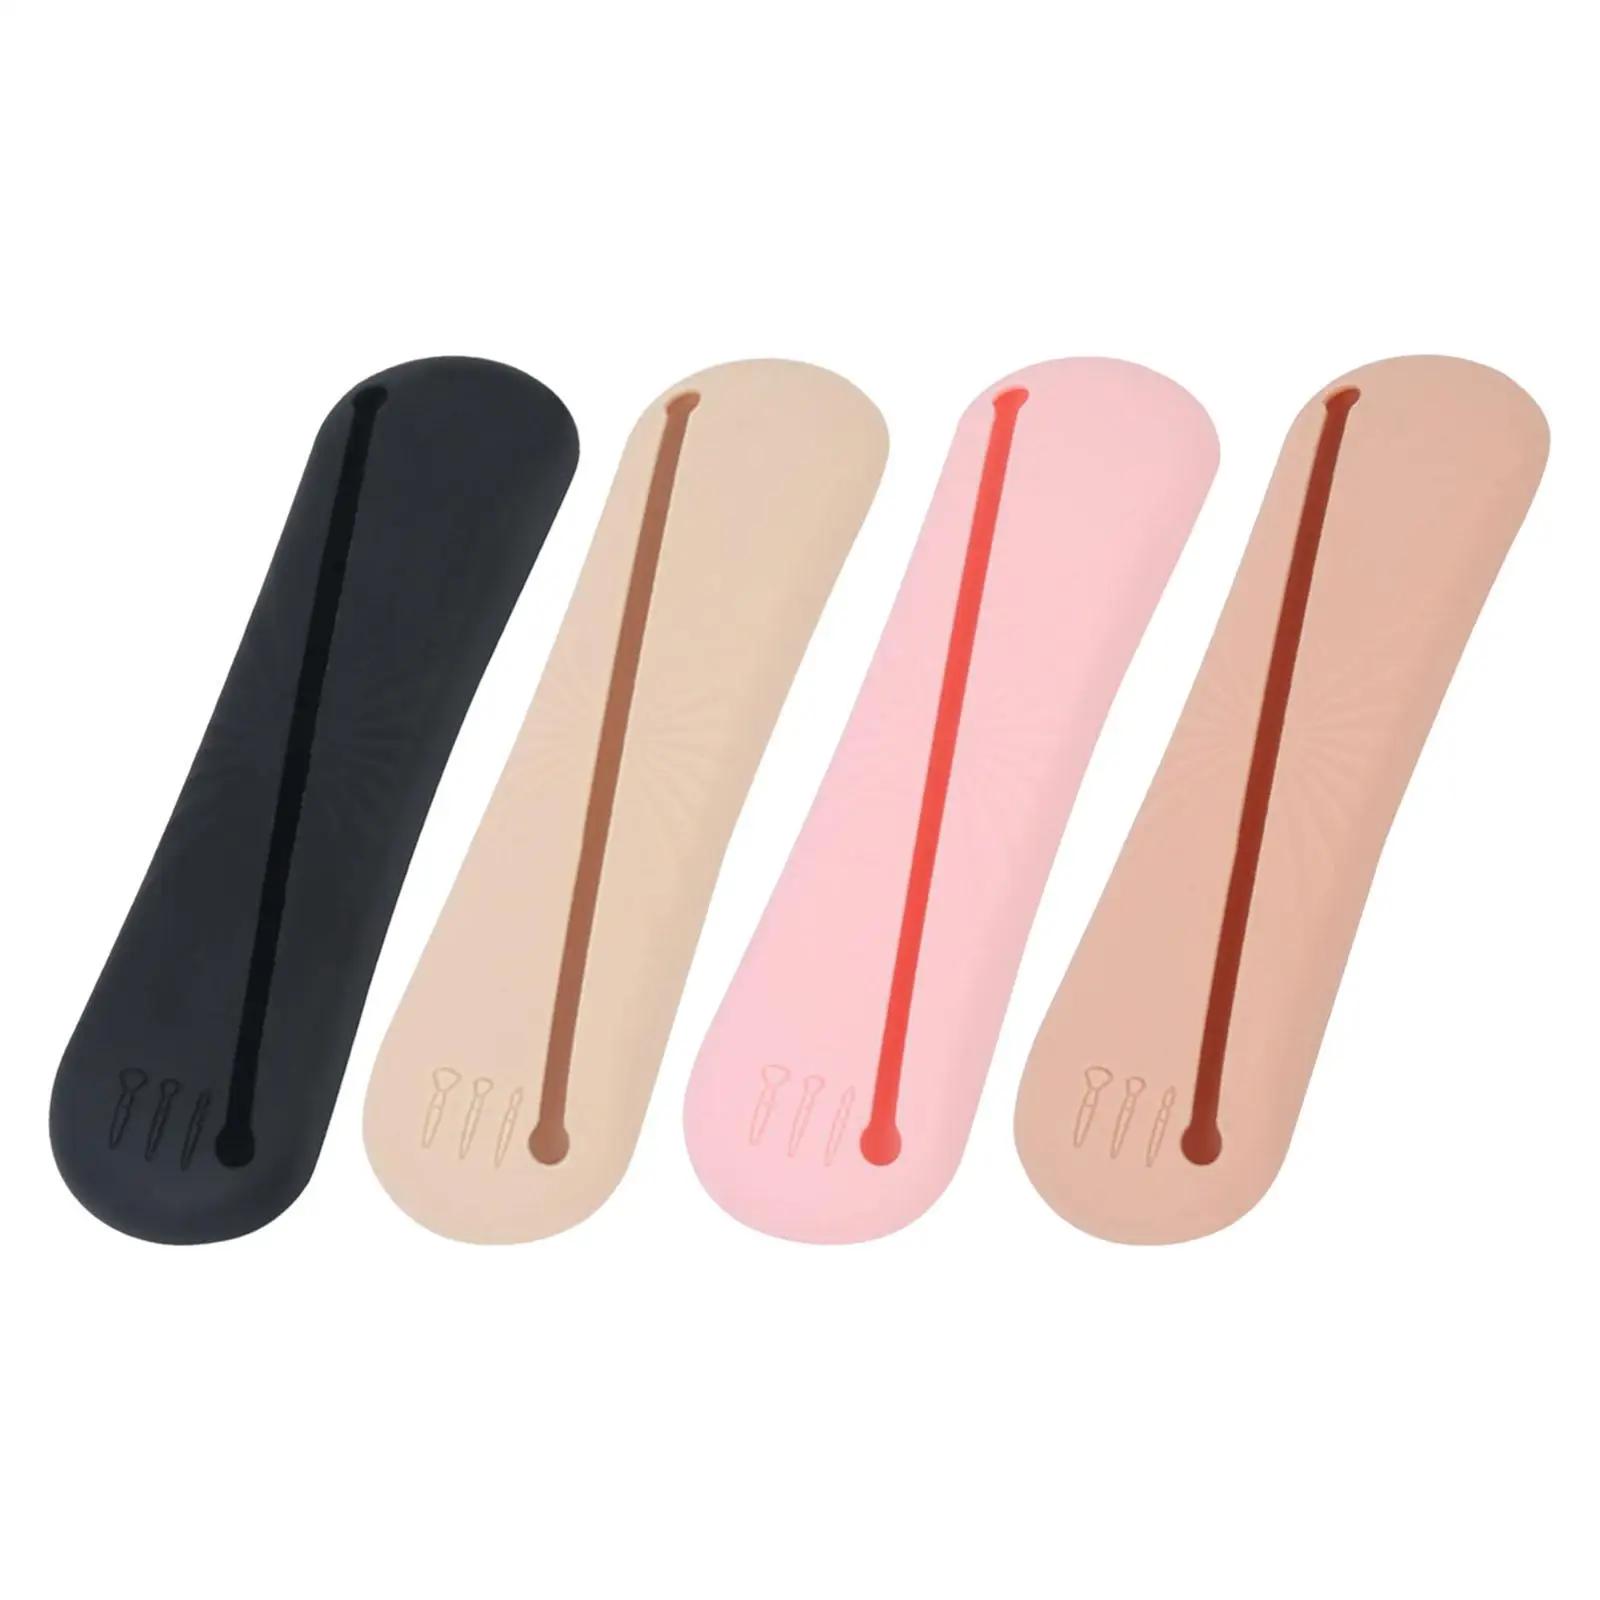 Makeup Brush Holder Cosmetics Holders High Capacity Silicone for